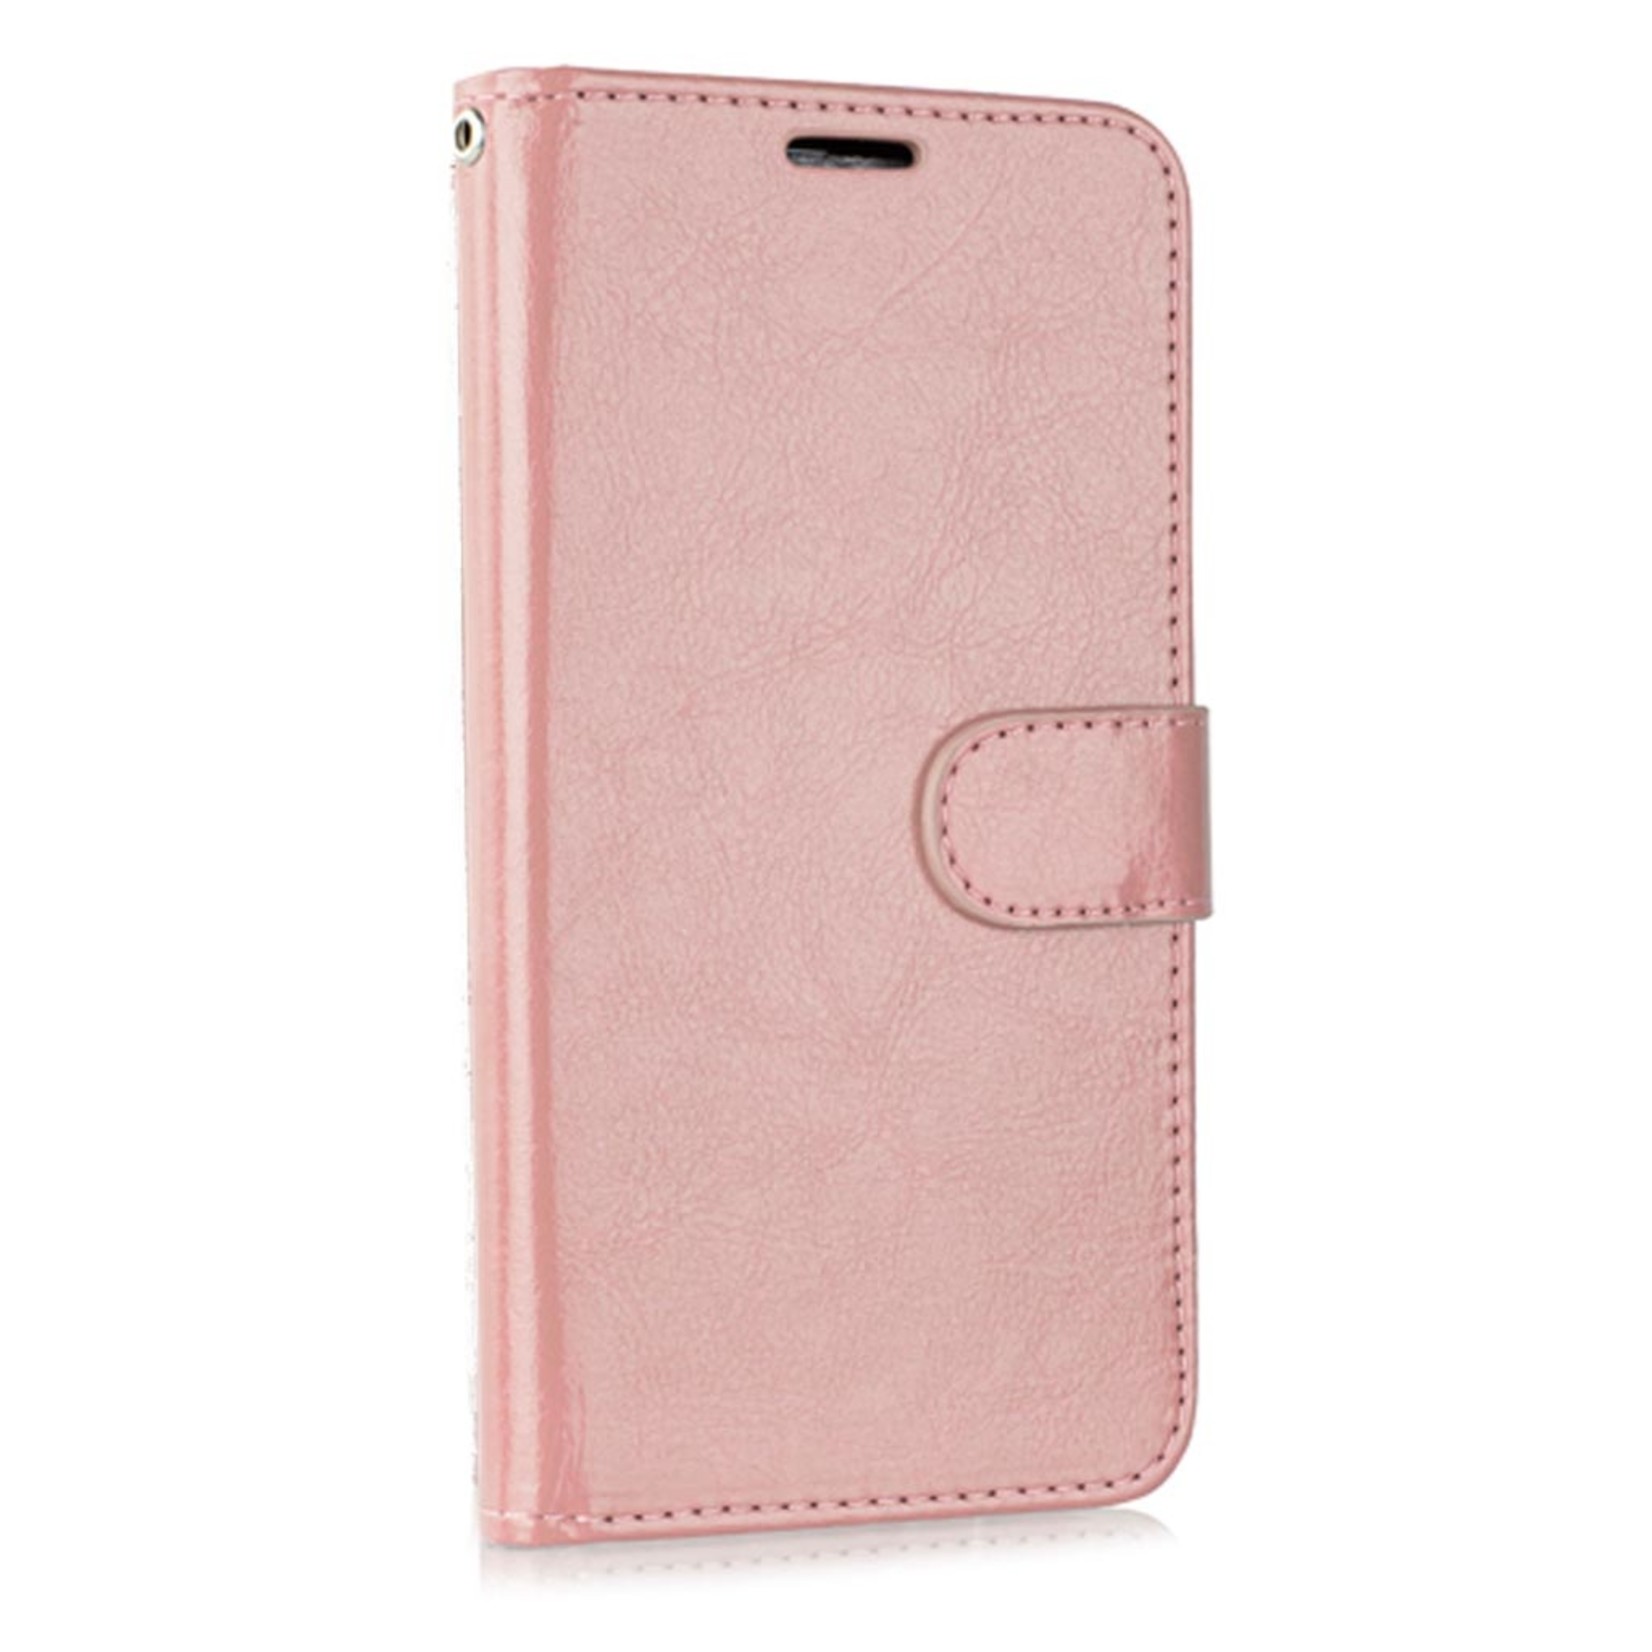 Hybrid PU Leather Flip Cover Case Wallet with Credit Card Slots for iPhone SE (2020) / 8 / 7